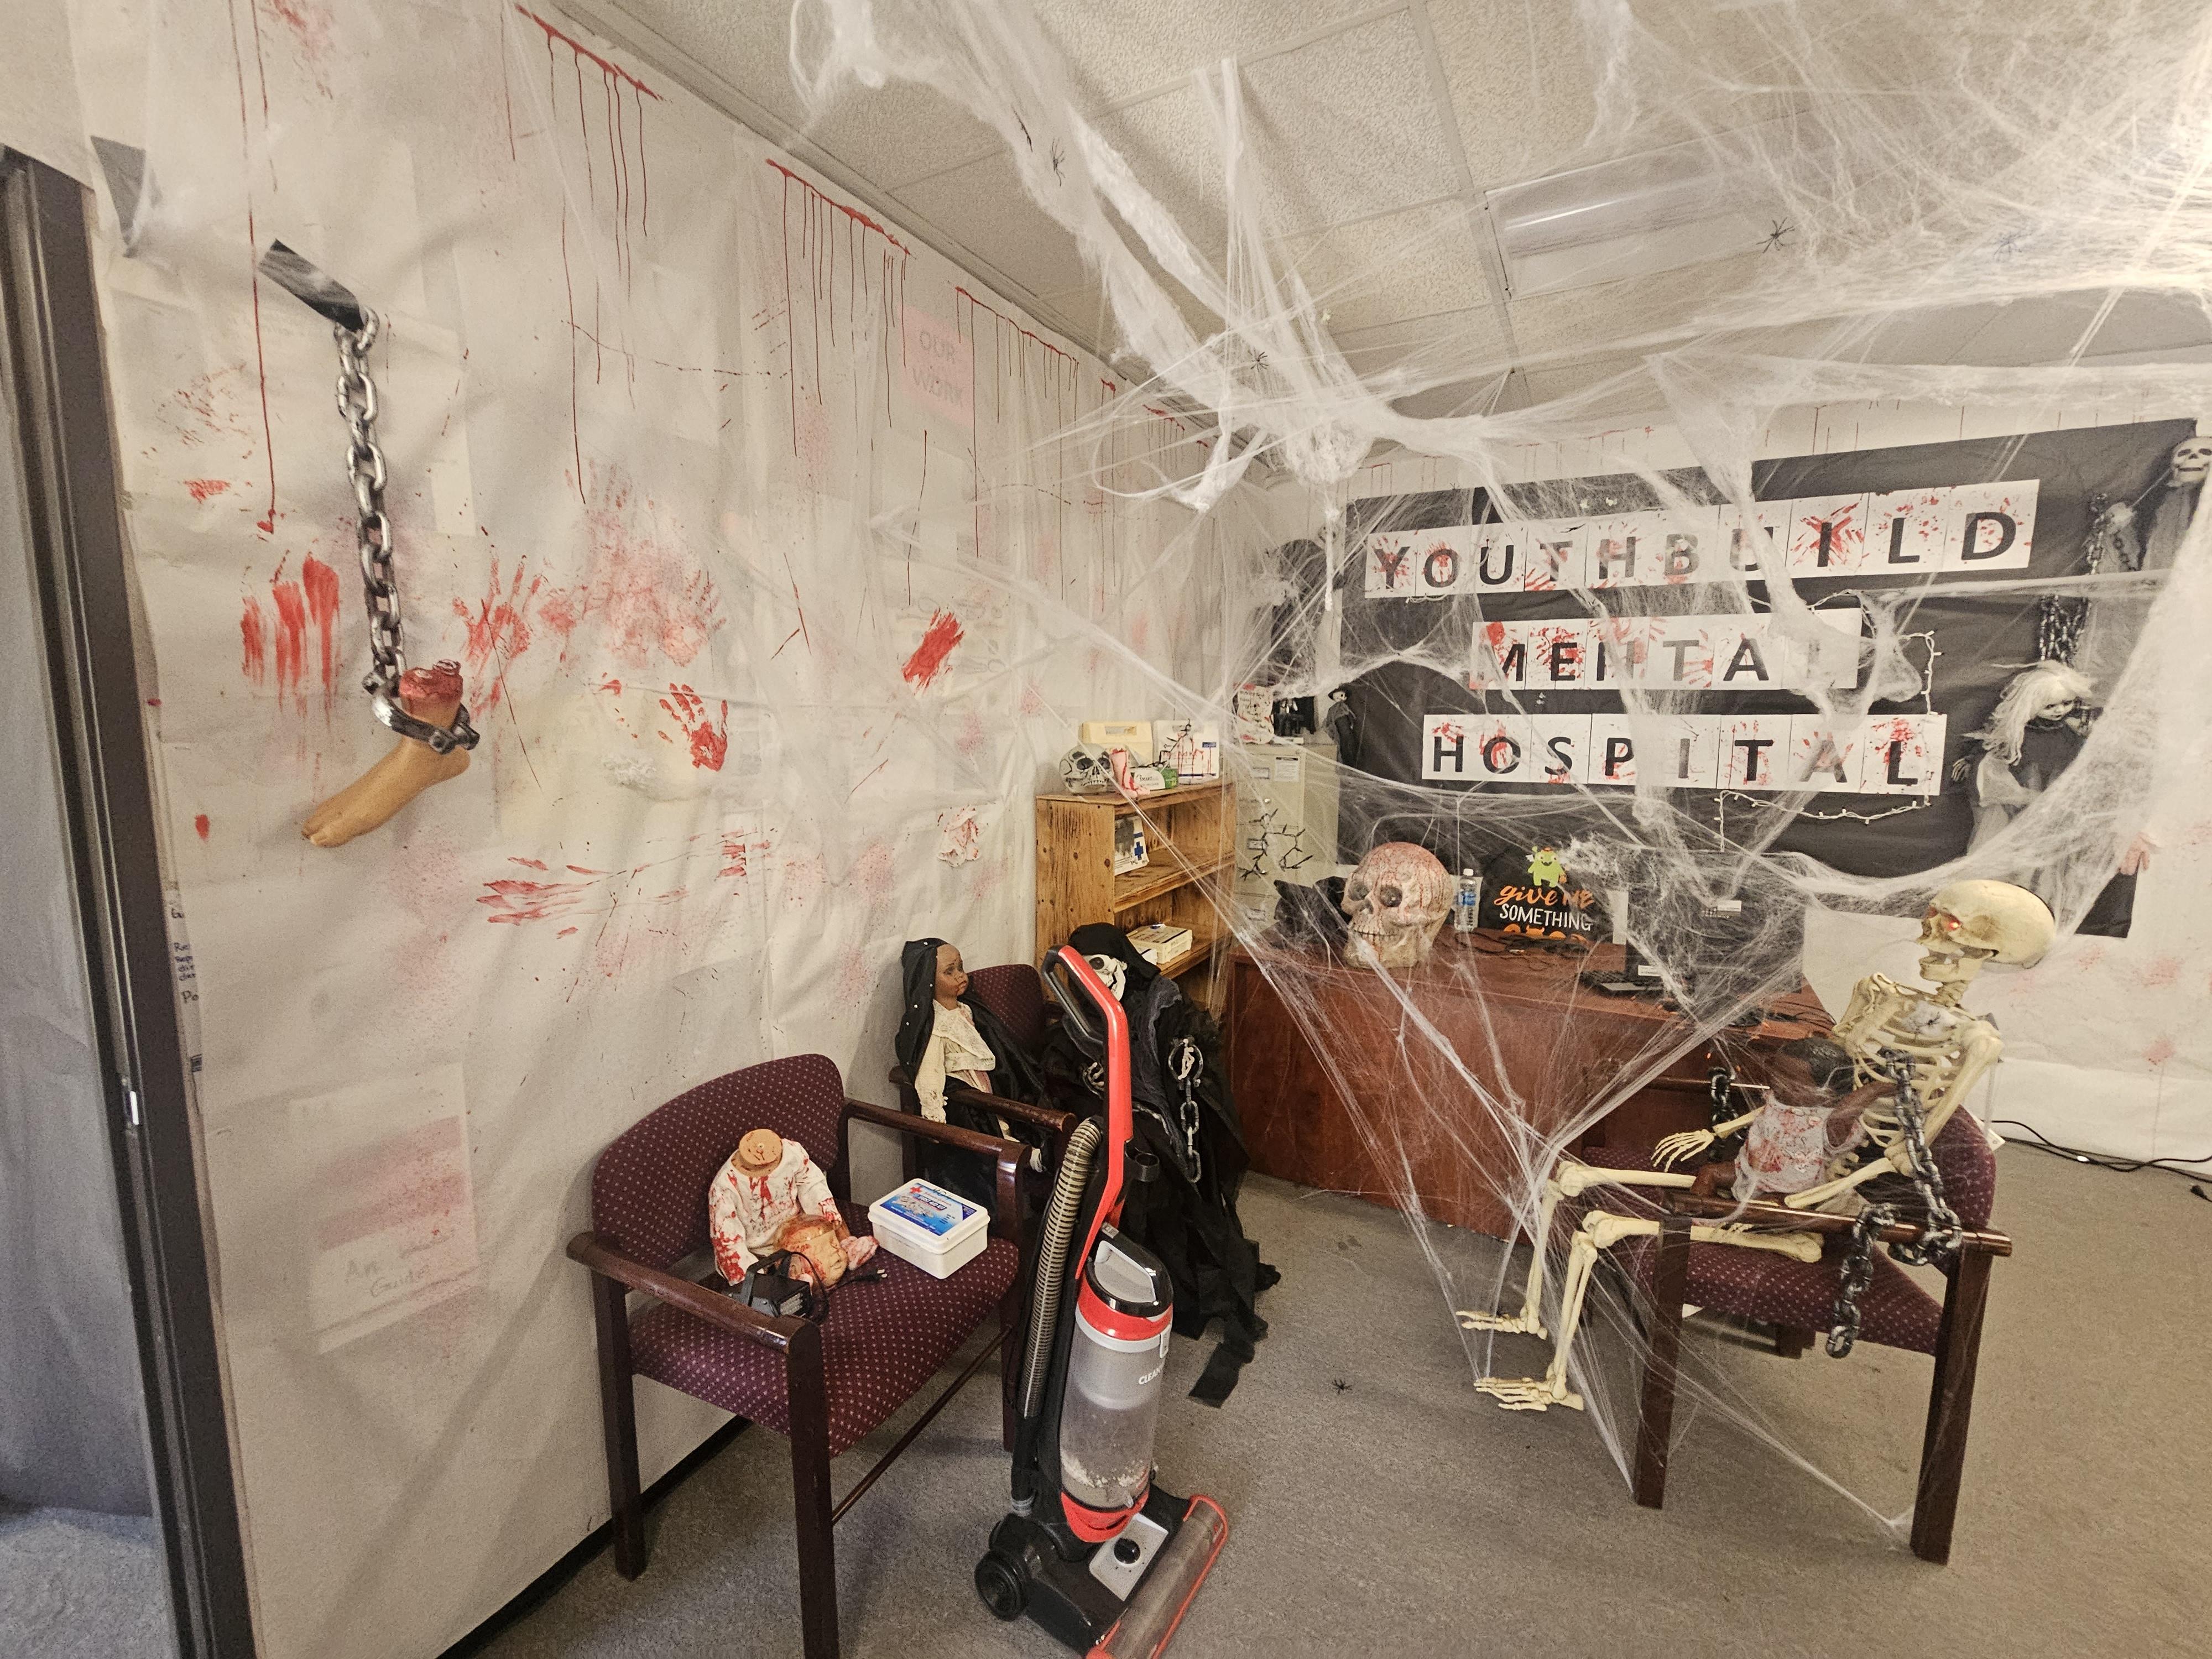 a spooky display called the YouthBuild Mental Hospital